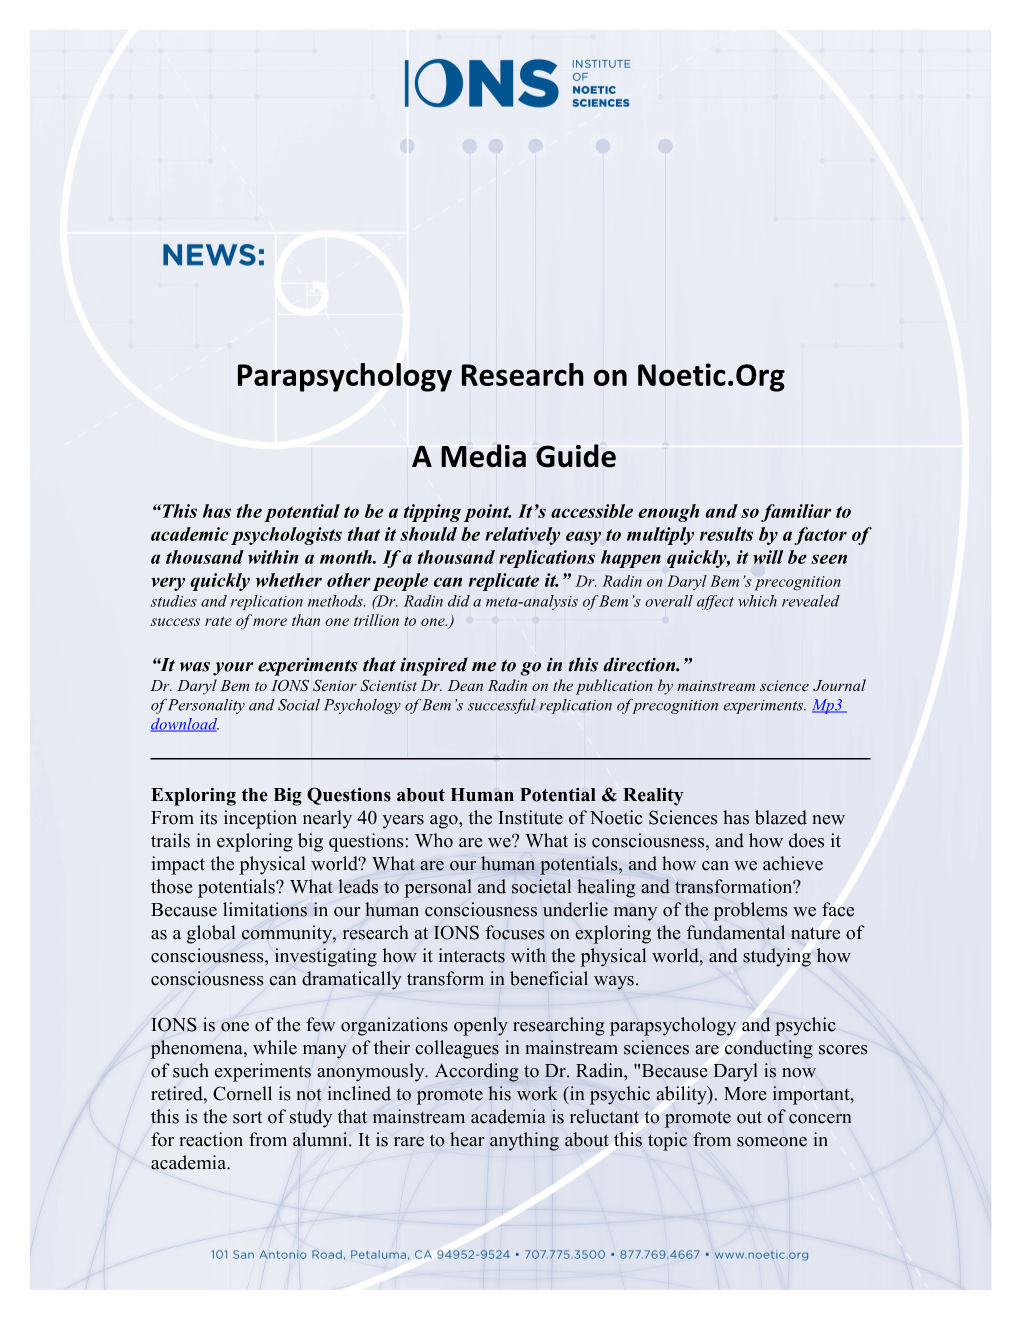 Parapsychology Research on Noetic.Org